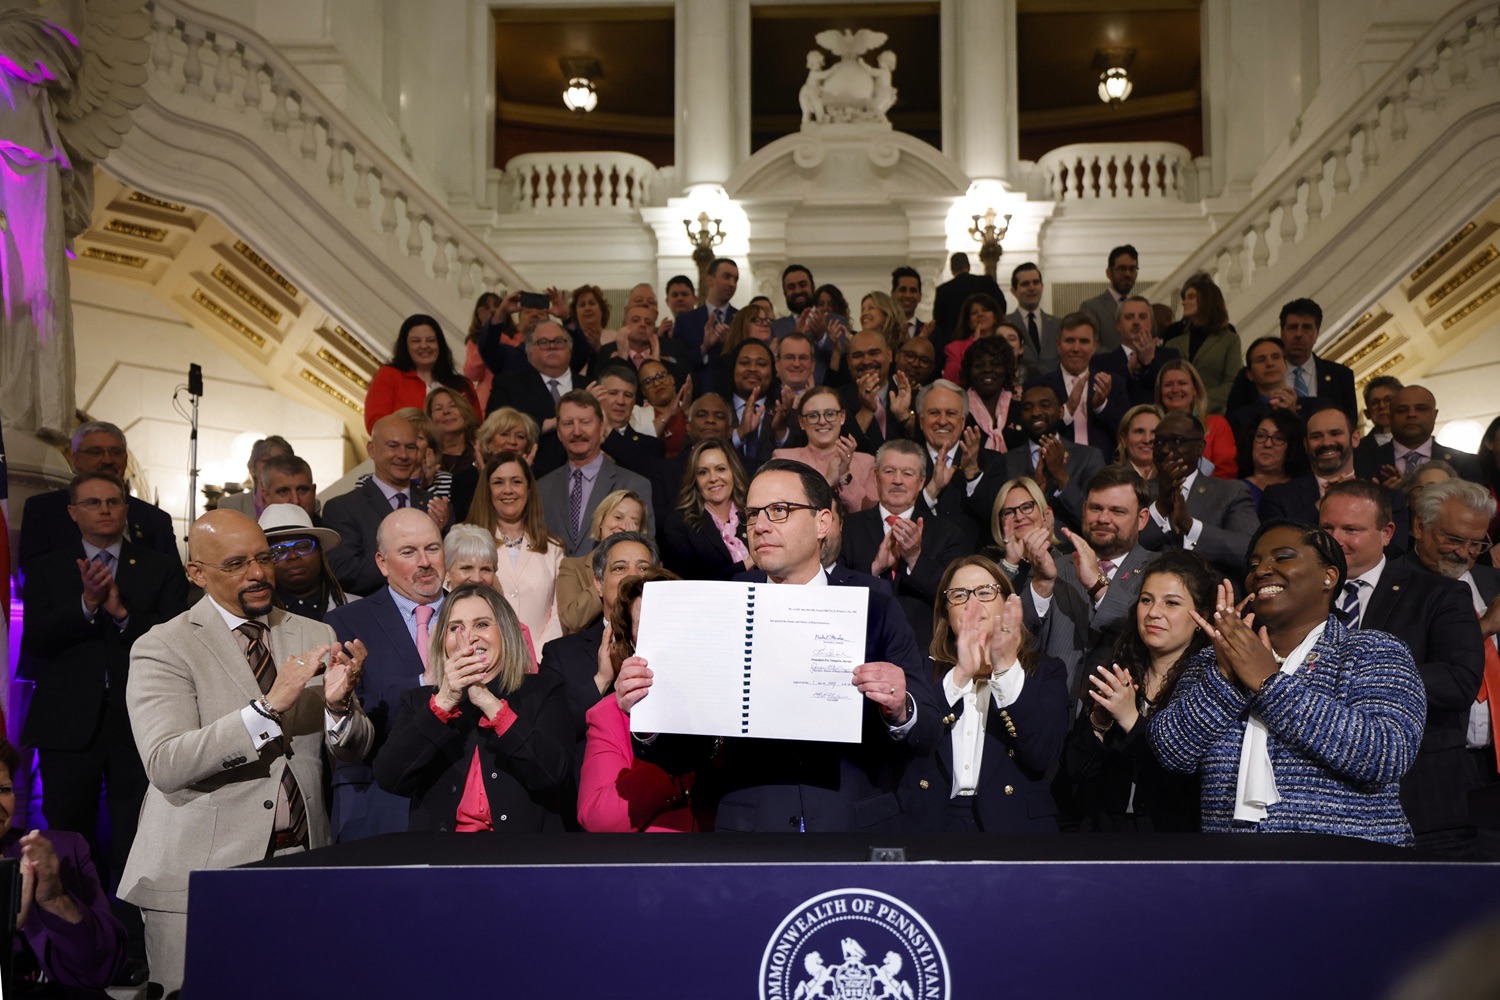 Governor Josh Shapiro signed the first bill of his Administration - Act 1 of 2023, a first-of-its-kind law in the nation that will require insurers to cover preventive breast and ovarian cancer screenings for high-risk women at no cost. MAY 01, 2023 - HARRISBURG, PA<br><a href="https://filesource.amperwave.net/commonwealthofpa/photo/23041_gov_sb8_dz_022.JPG" target="_blank">⇣ Download Photo</a>